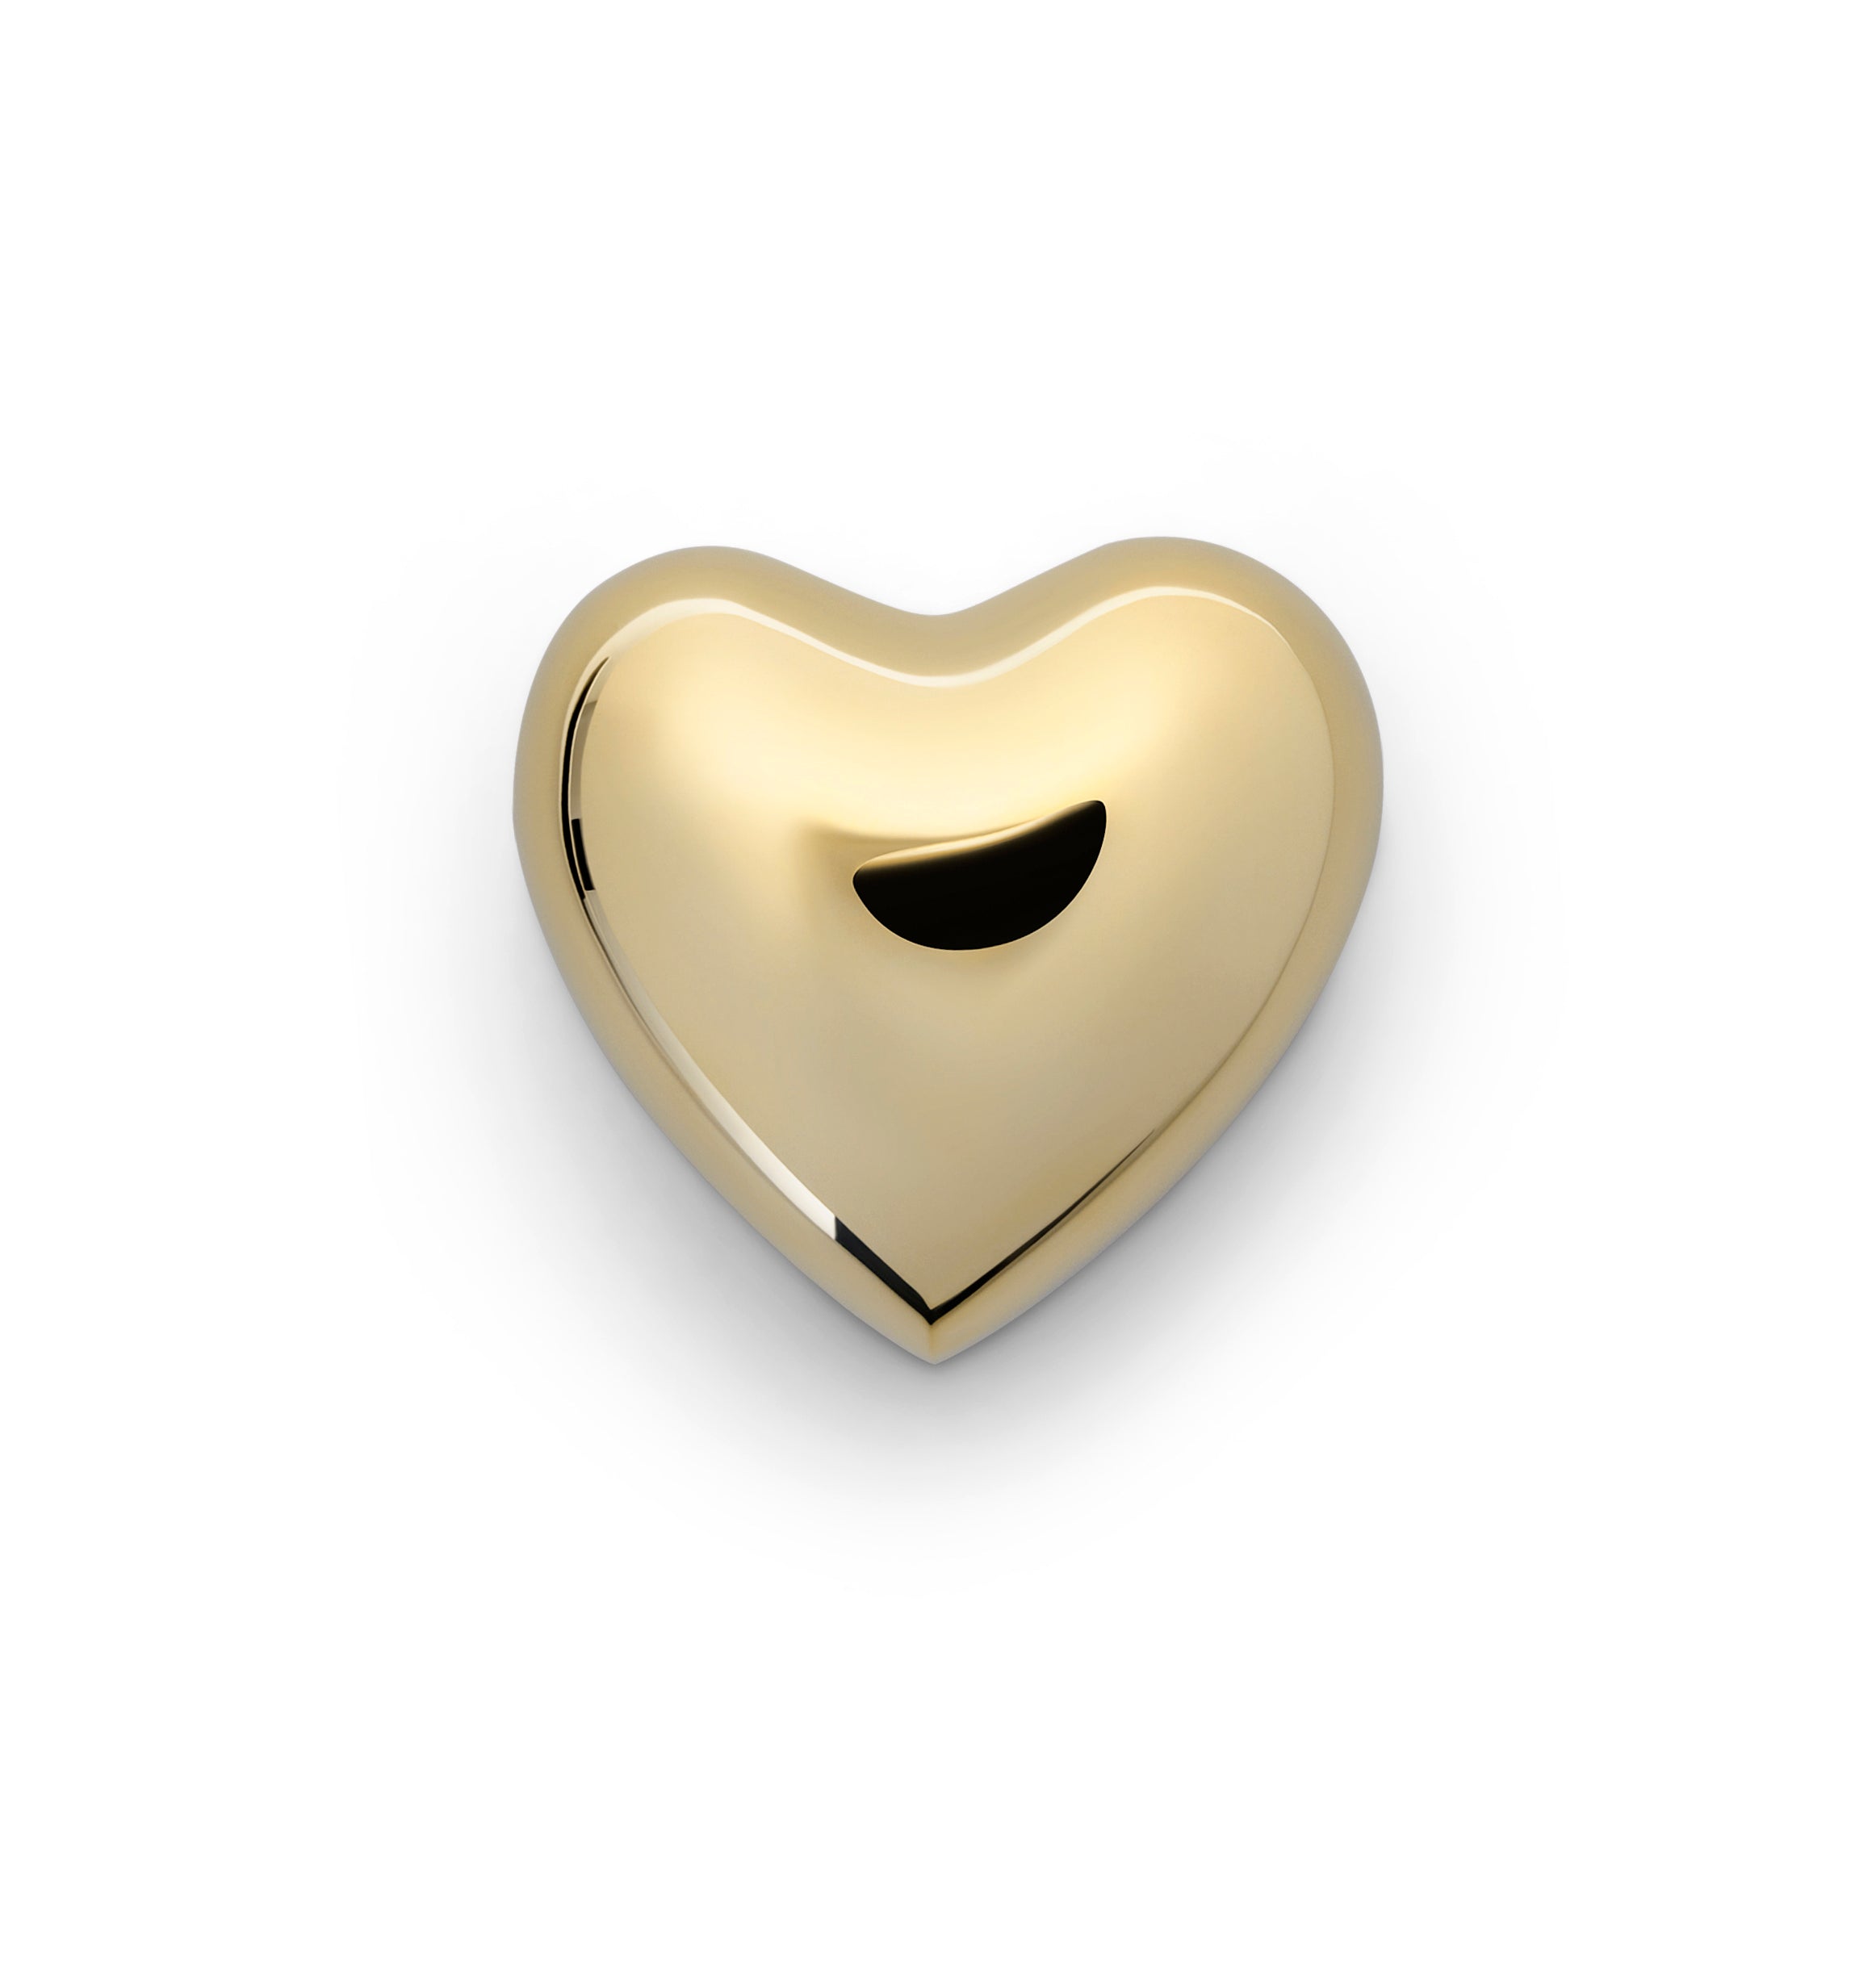 a brass heart shaped object on a white background